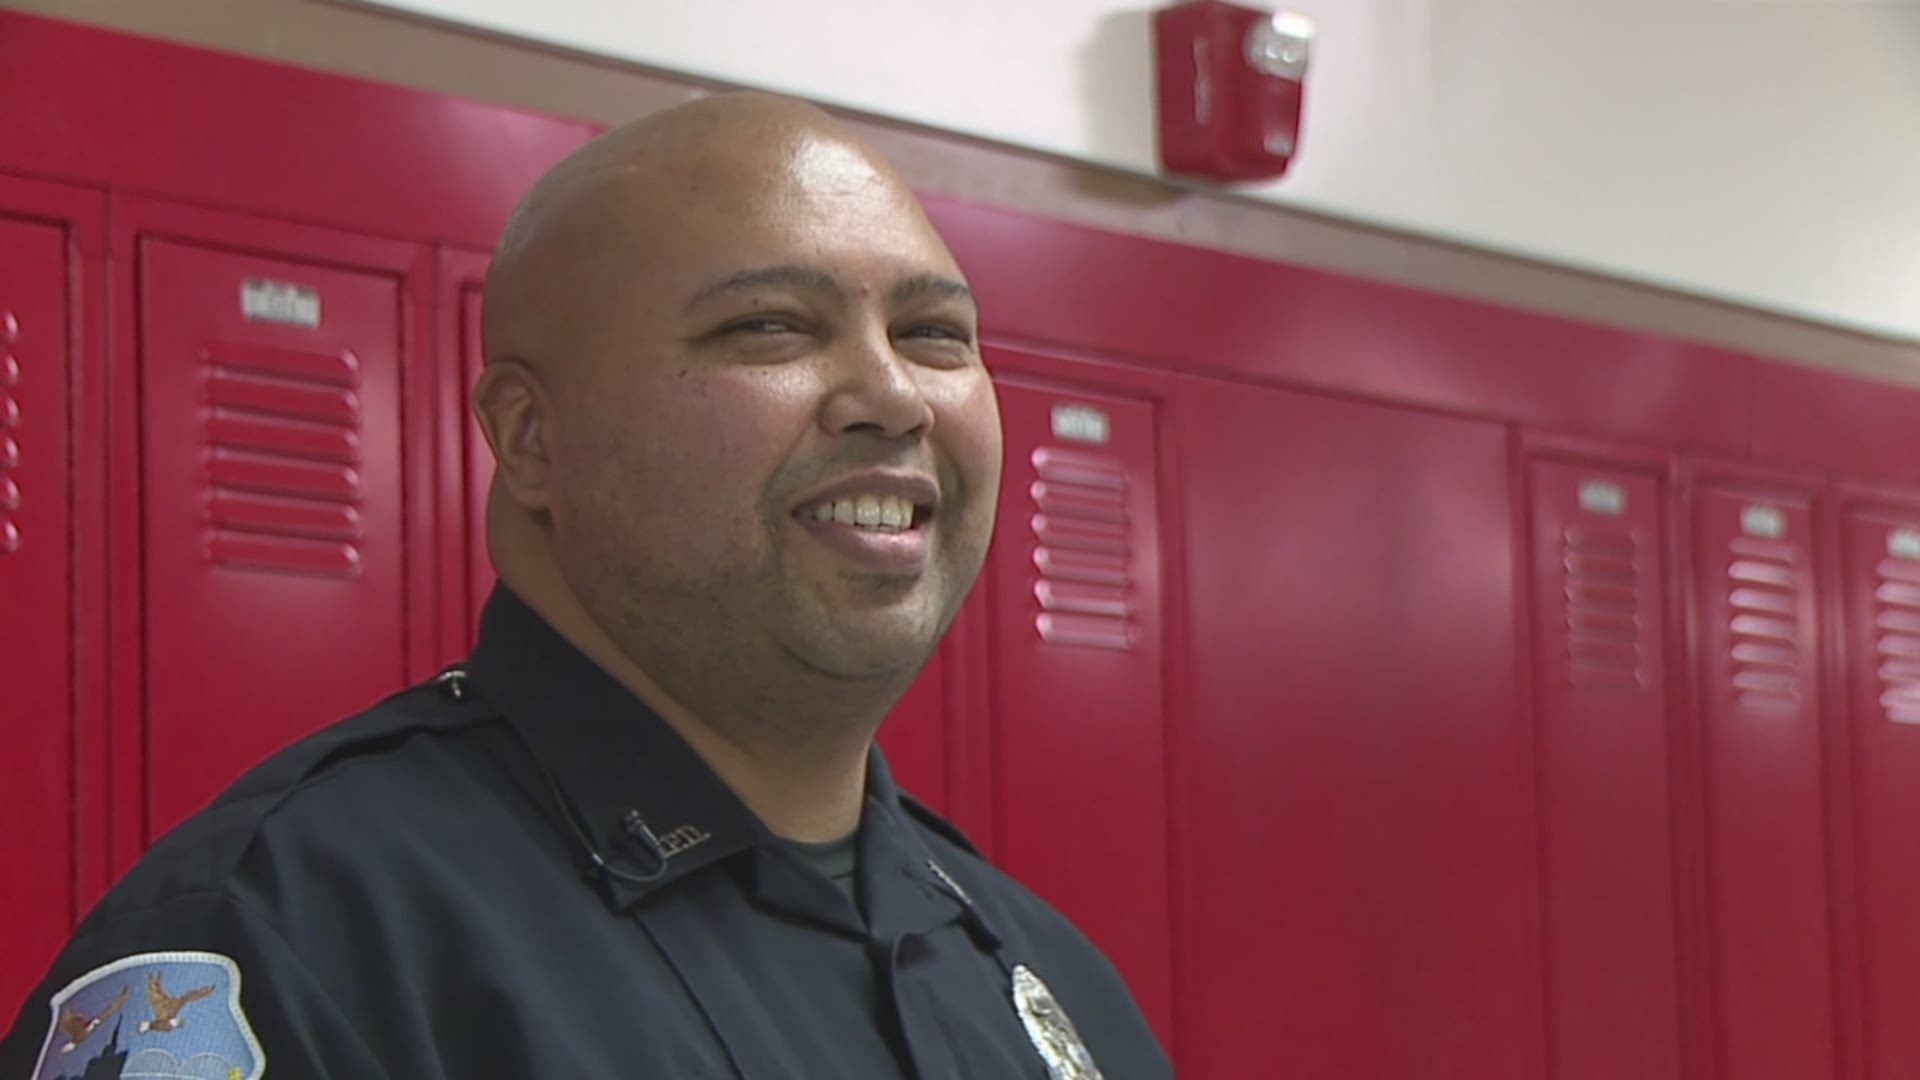 Davenport re-thinking having police officers inside schools